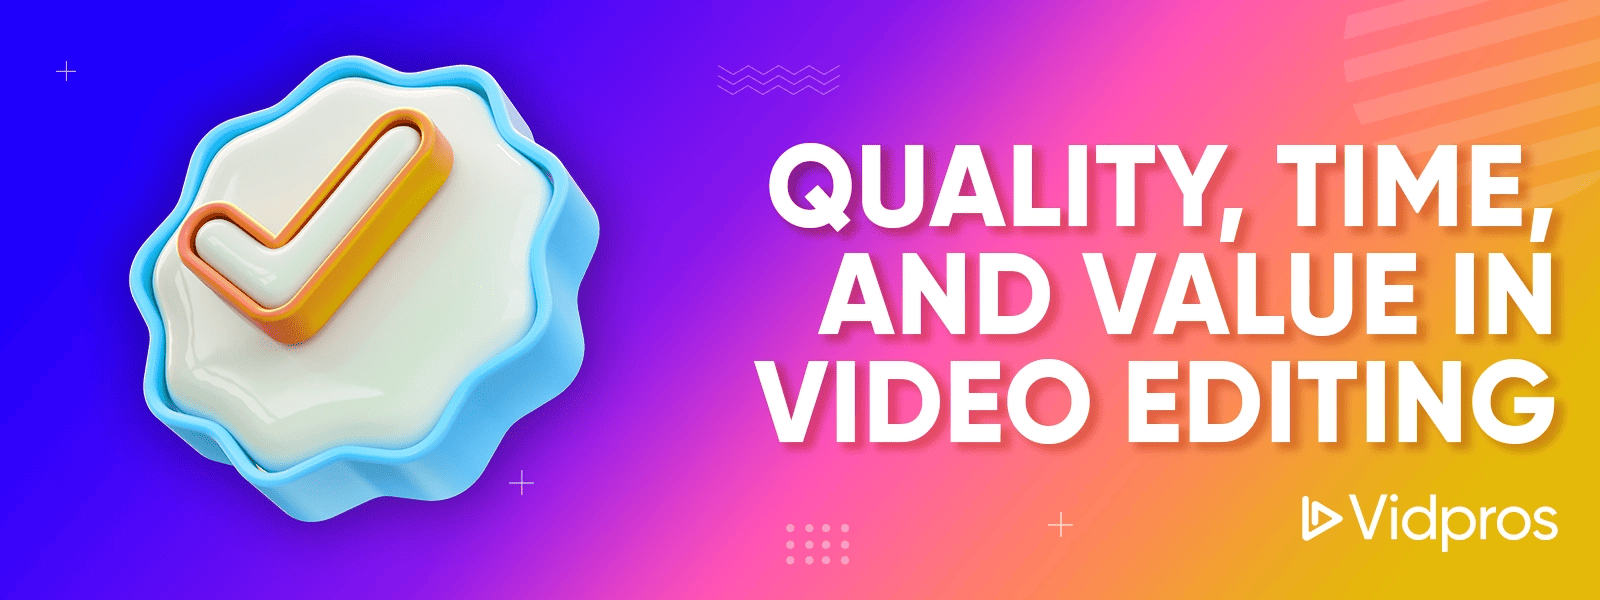 quality, time and value in video editing